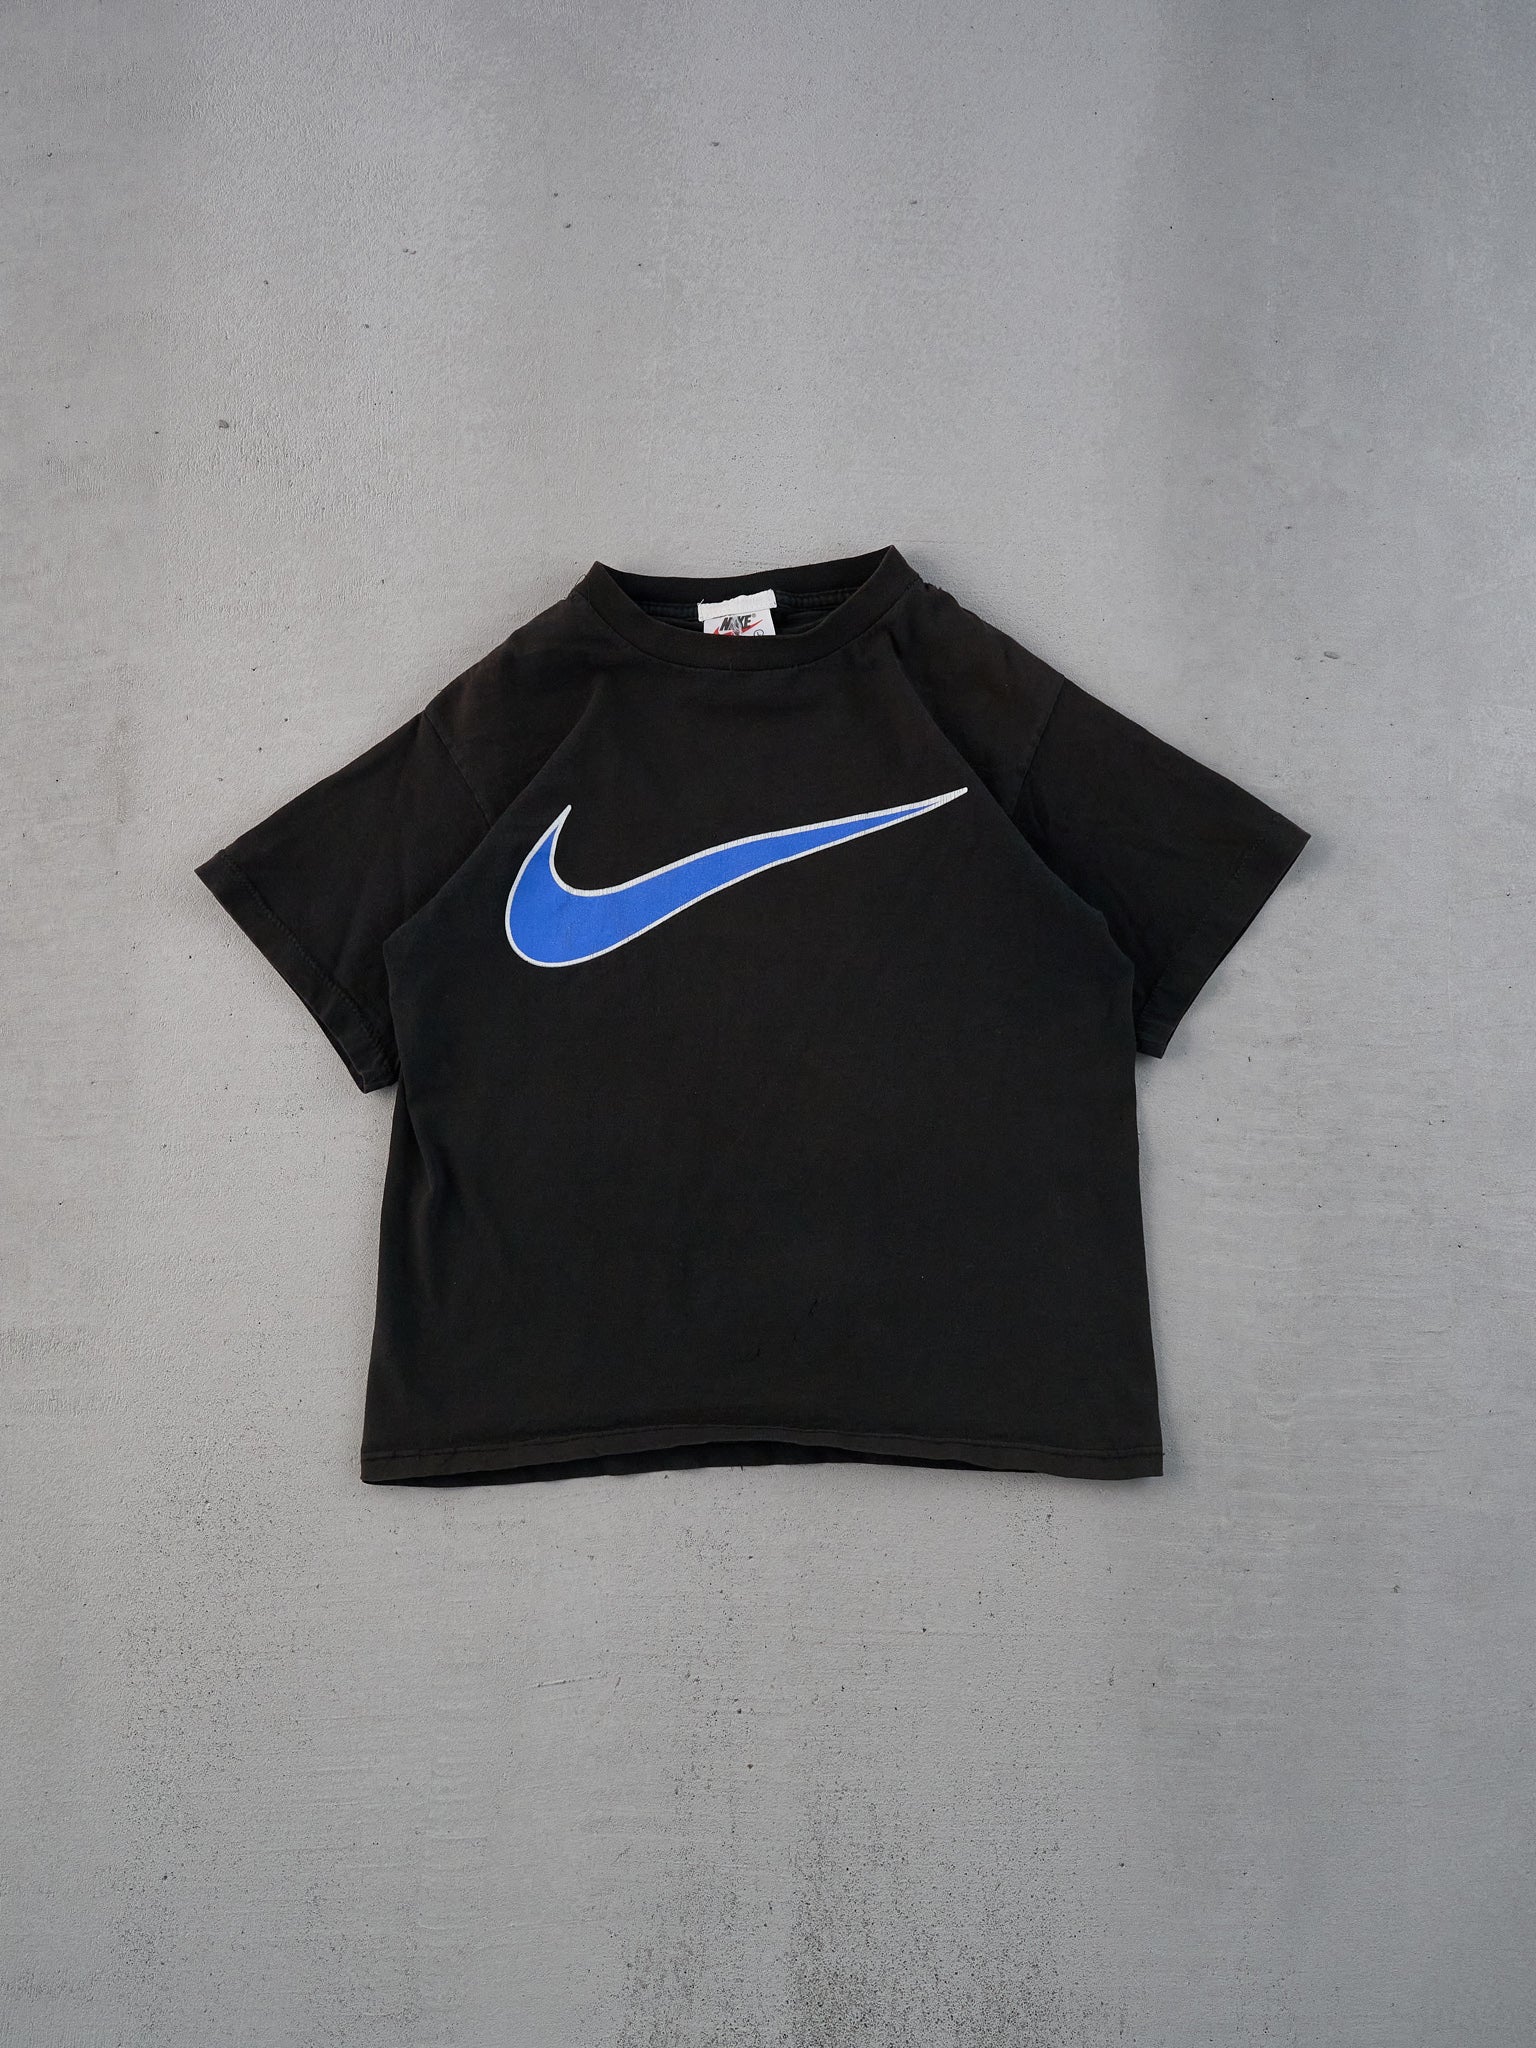 Vintage 90s Black and Blue Nike Swoosh Graphic Tee (S)